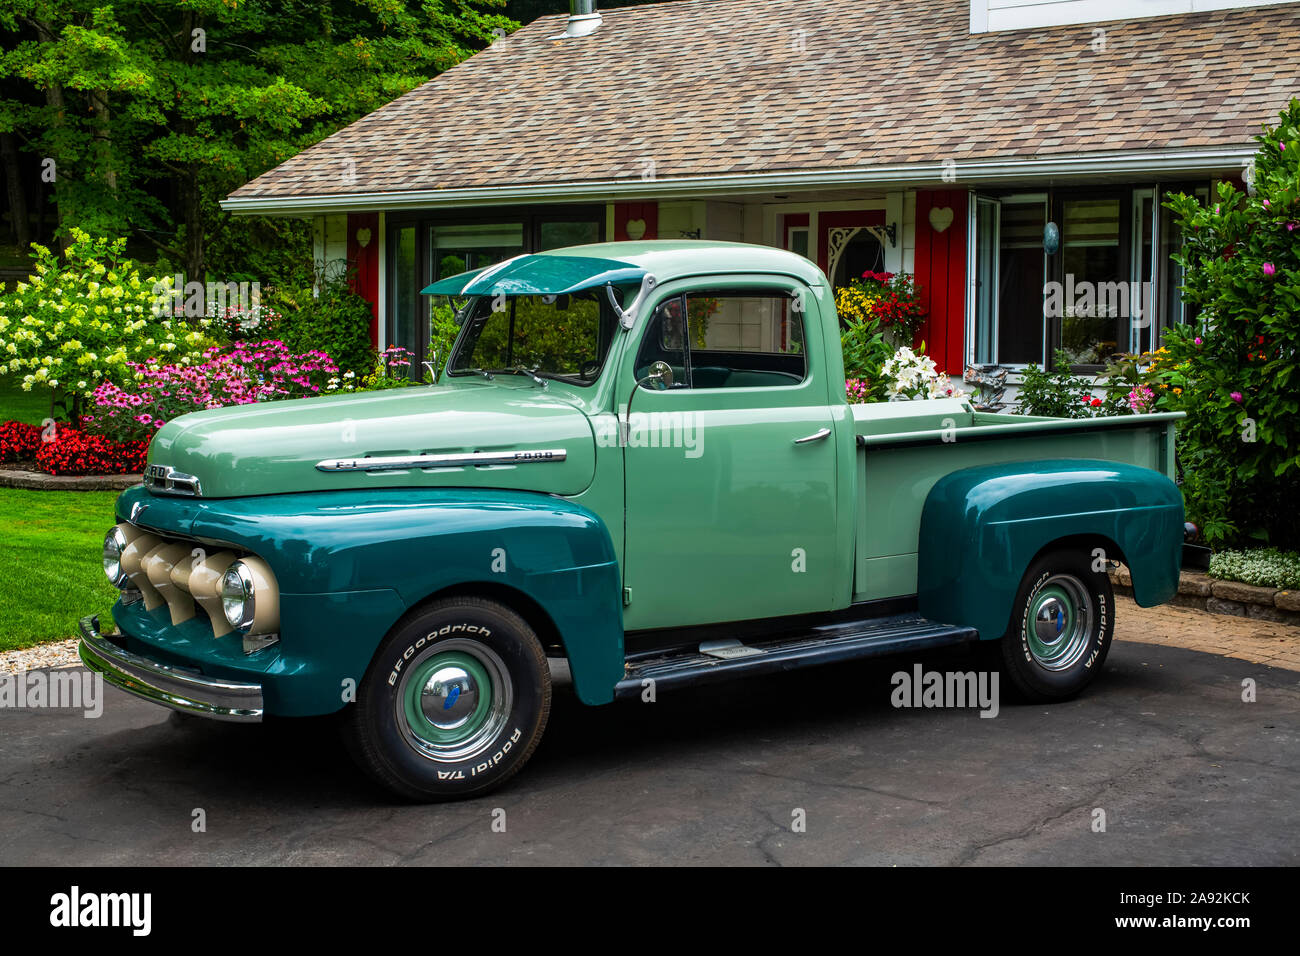 Vintage truck parked outside a house with blossoming flowers; Hudson, Quebec, Canada Stock Photo